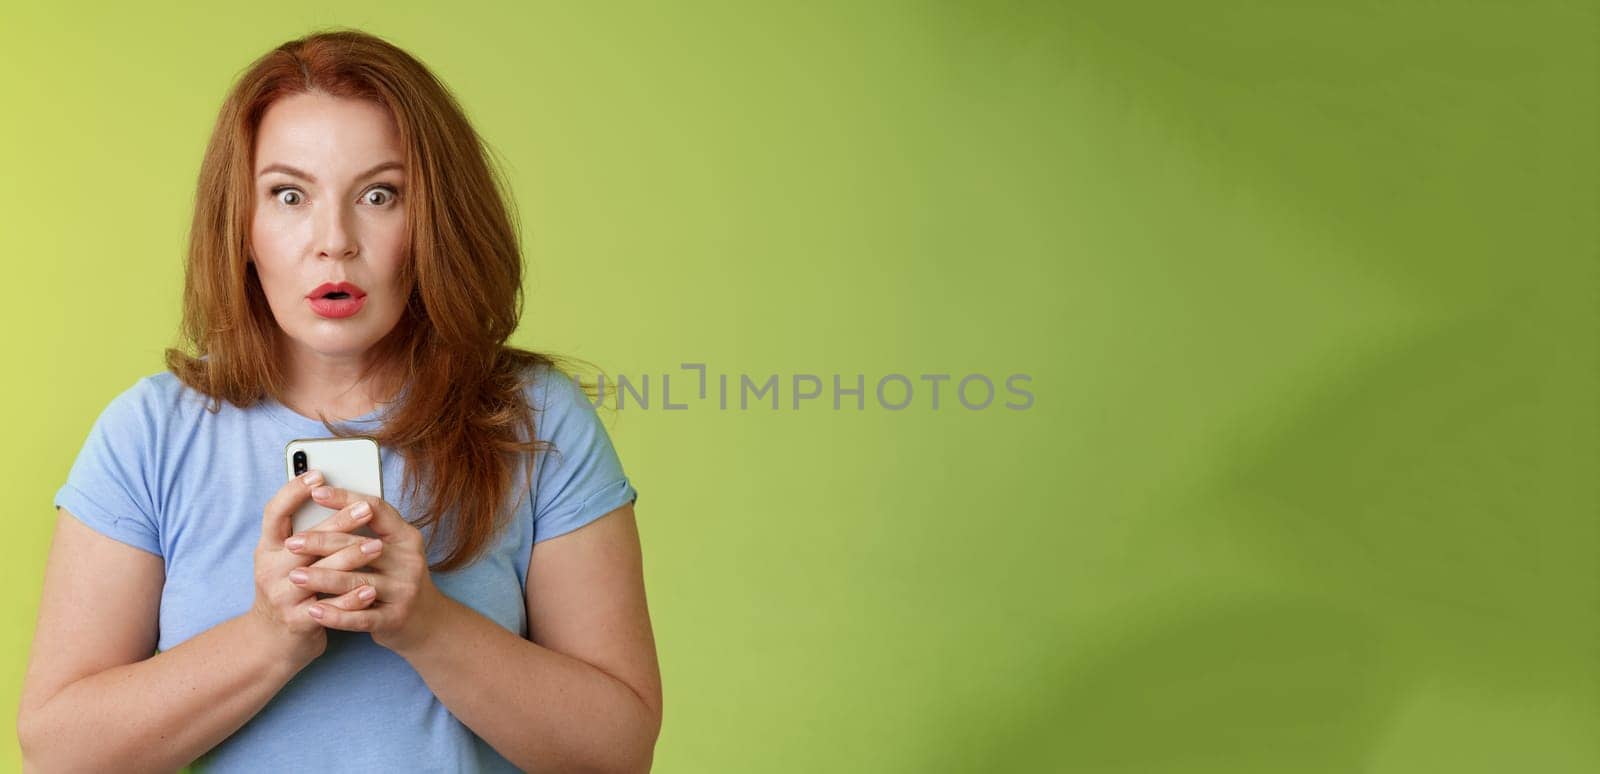 Shocked speechless impressed redhead european middle-aged woman fold lips astonished wow stare camera fascinated react amazed wondered received message hold smartphone intense green background.